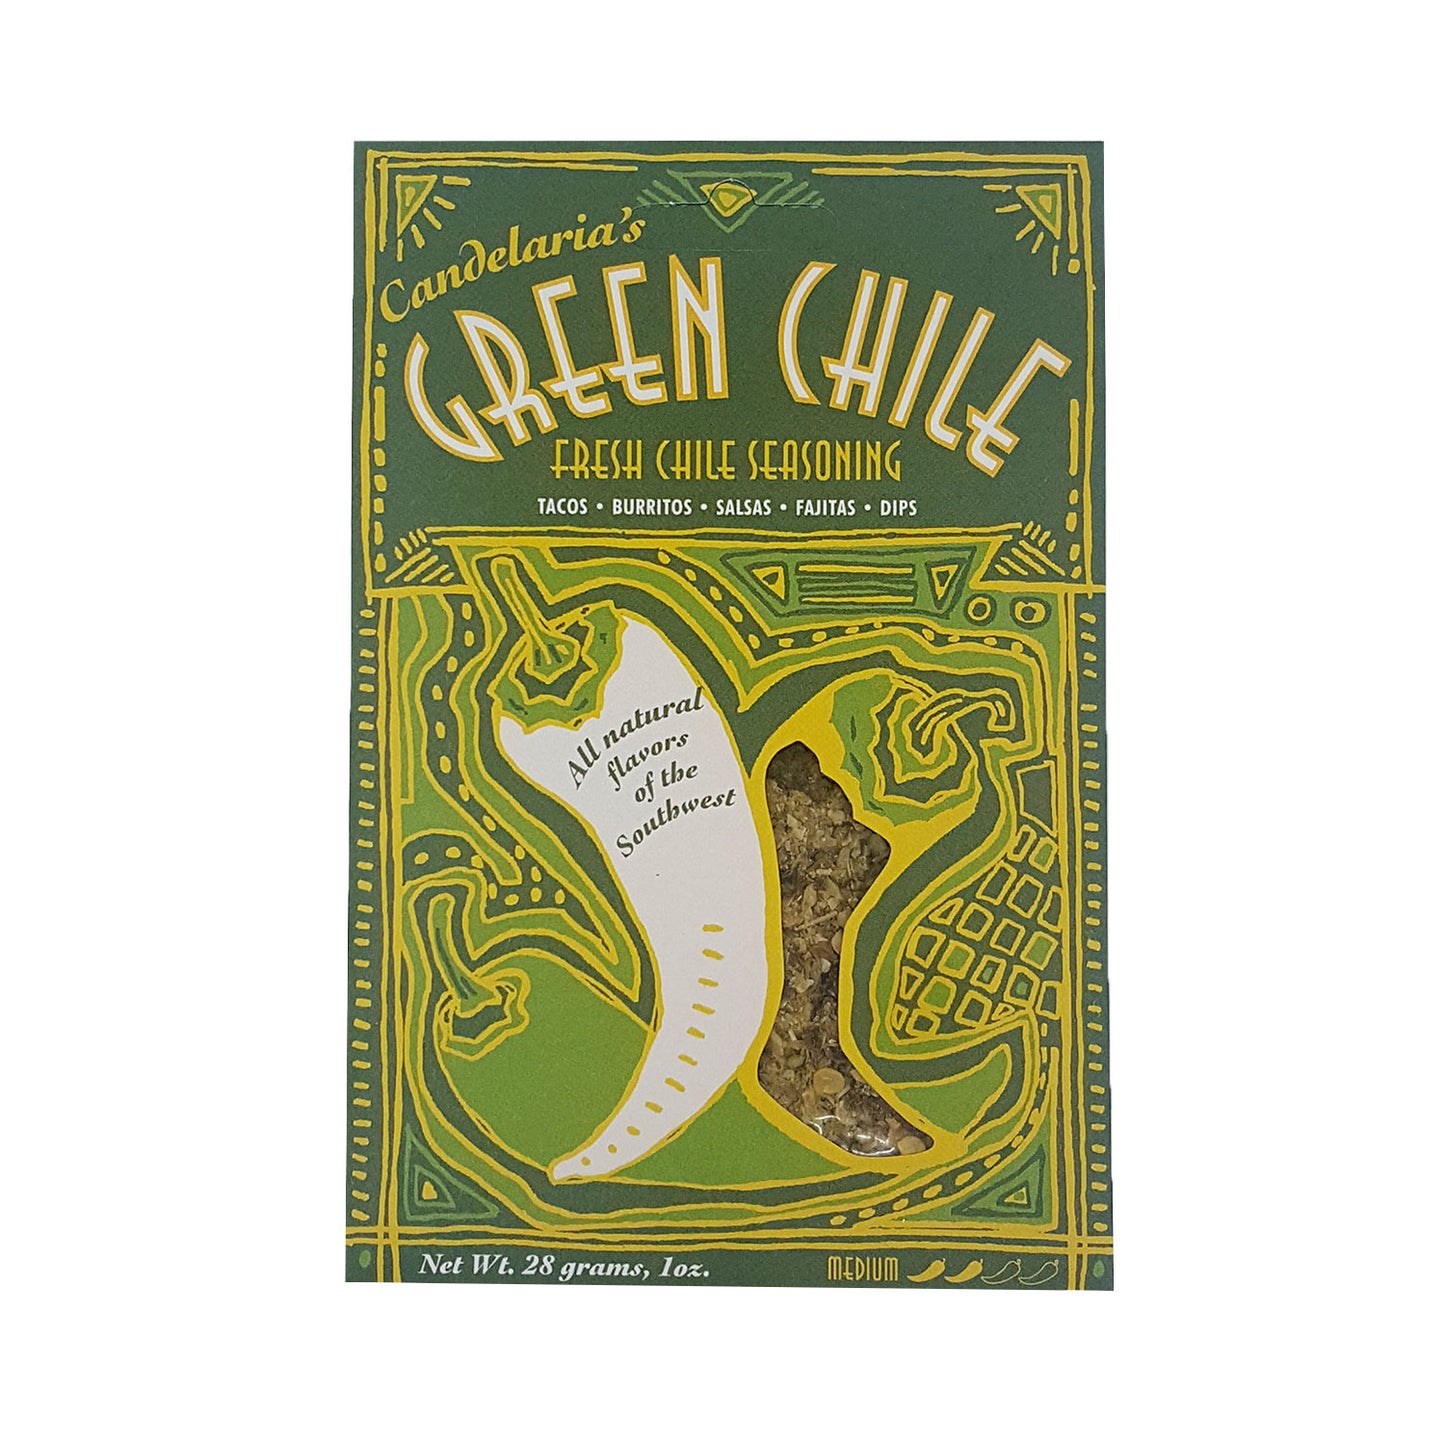 Load image into Gallery viewer, Fresh green chile seasoning - Makes an award winning Green Chile Dip! Also for Marinades, Tacos, Burritos, Salsas and Fajitas, recipes on packaging Green chile, onions, sea salt, select spices All natural, Gluten free, no sugar or preservatives, very low sodium Medium heat 1 oz. spice pack
